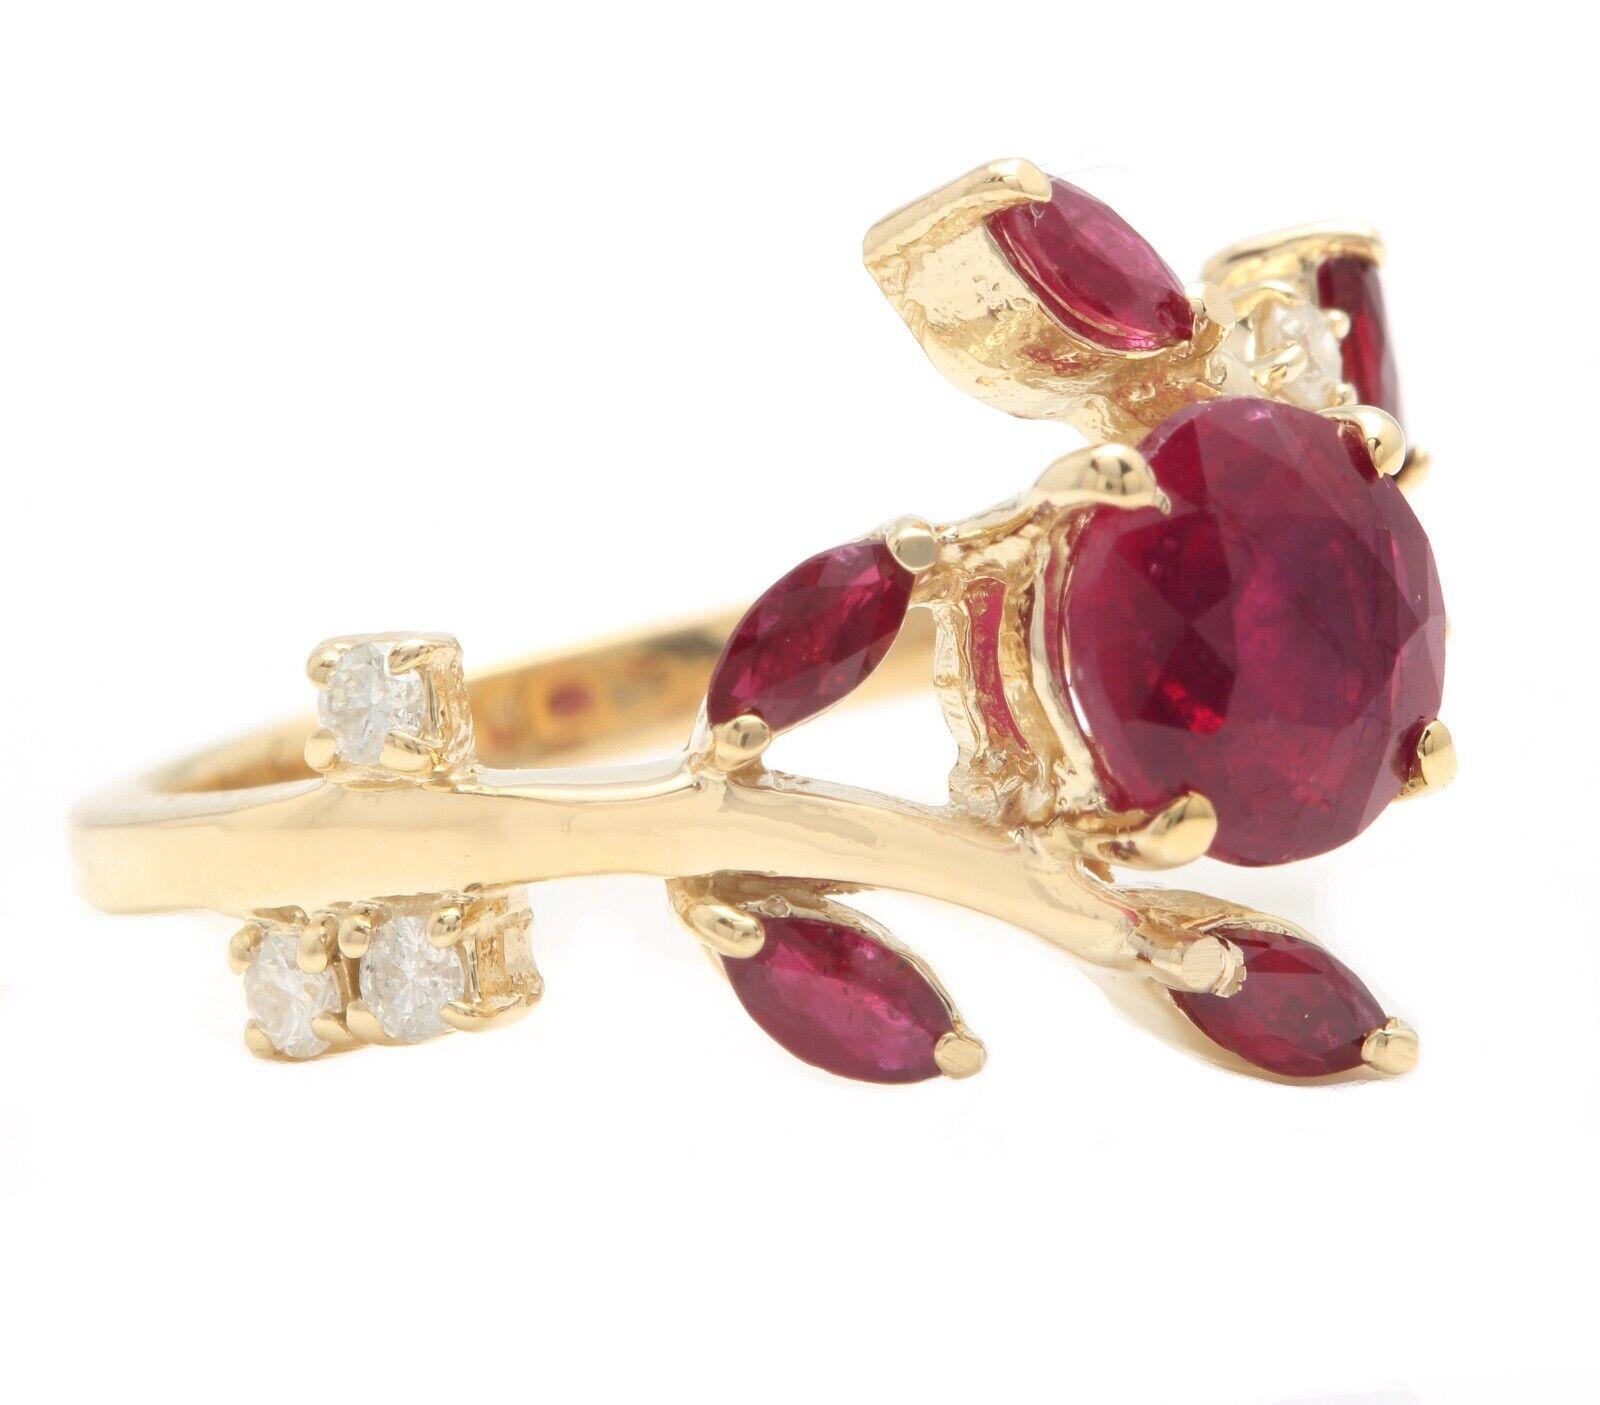 2.38 Carats Impressive Natural Red Ruby and Diamond 14K Yellow Gold Ring

Suggested Replacement Value: $5,500.00

Total Center Red Ruby Weight is: Approx. 1.50 Carats (Fracture Filled)

Center Ruby Measures: Approx. 7.00mm

Side Marquise Natural